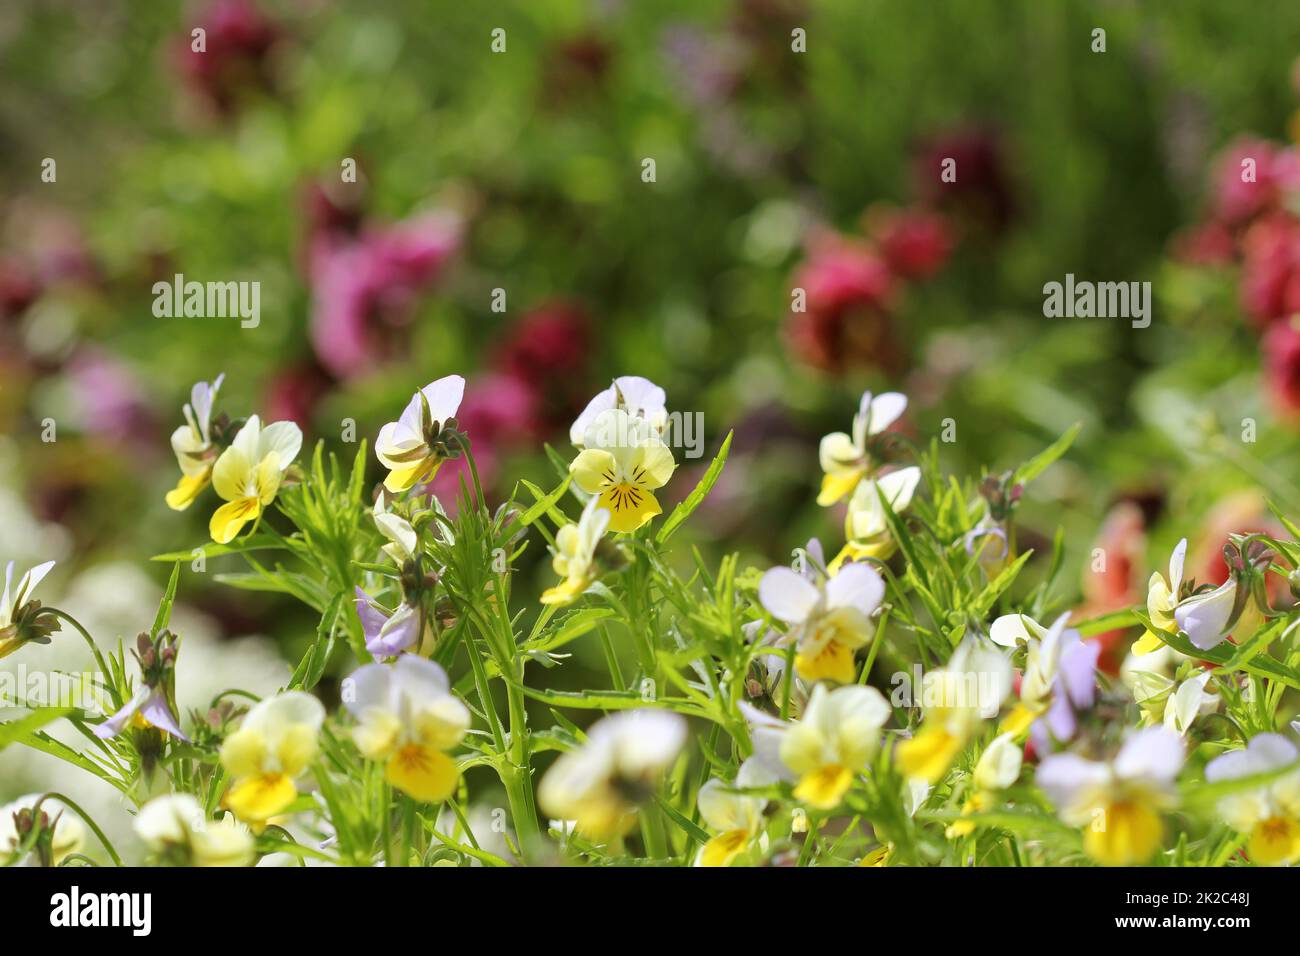 Difference colour of pansy flower, viola, spring flower Stock Photo